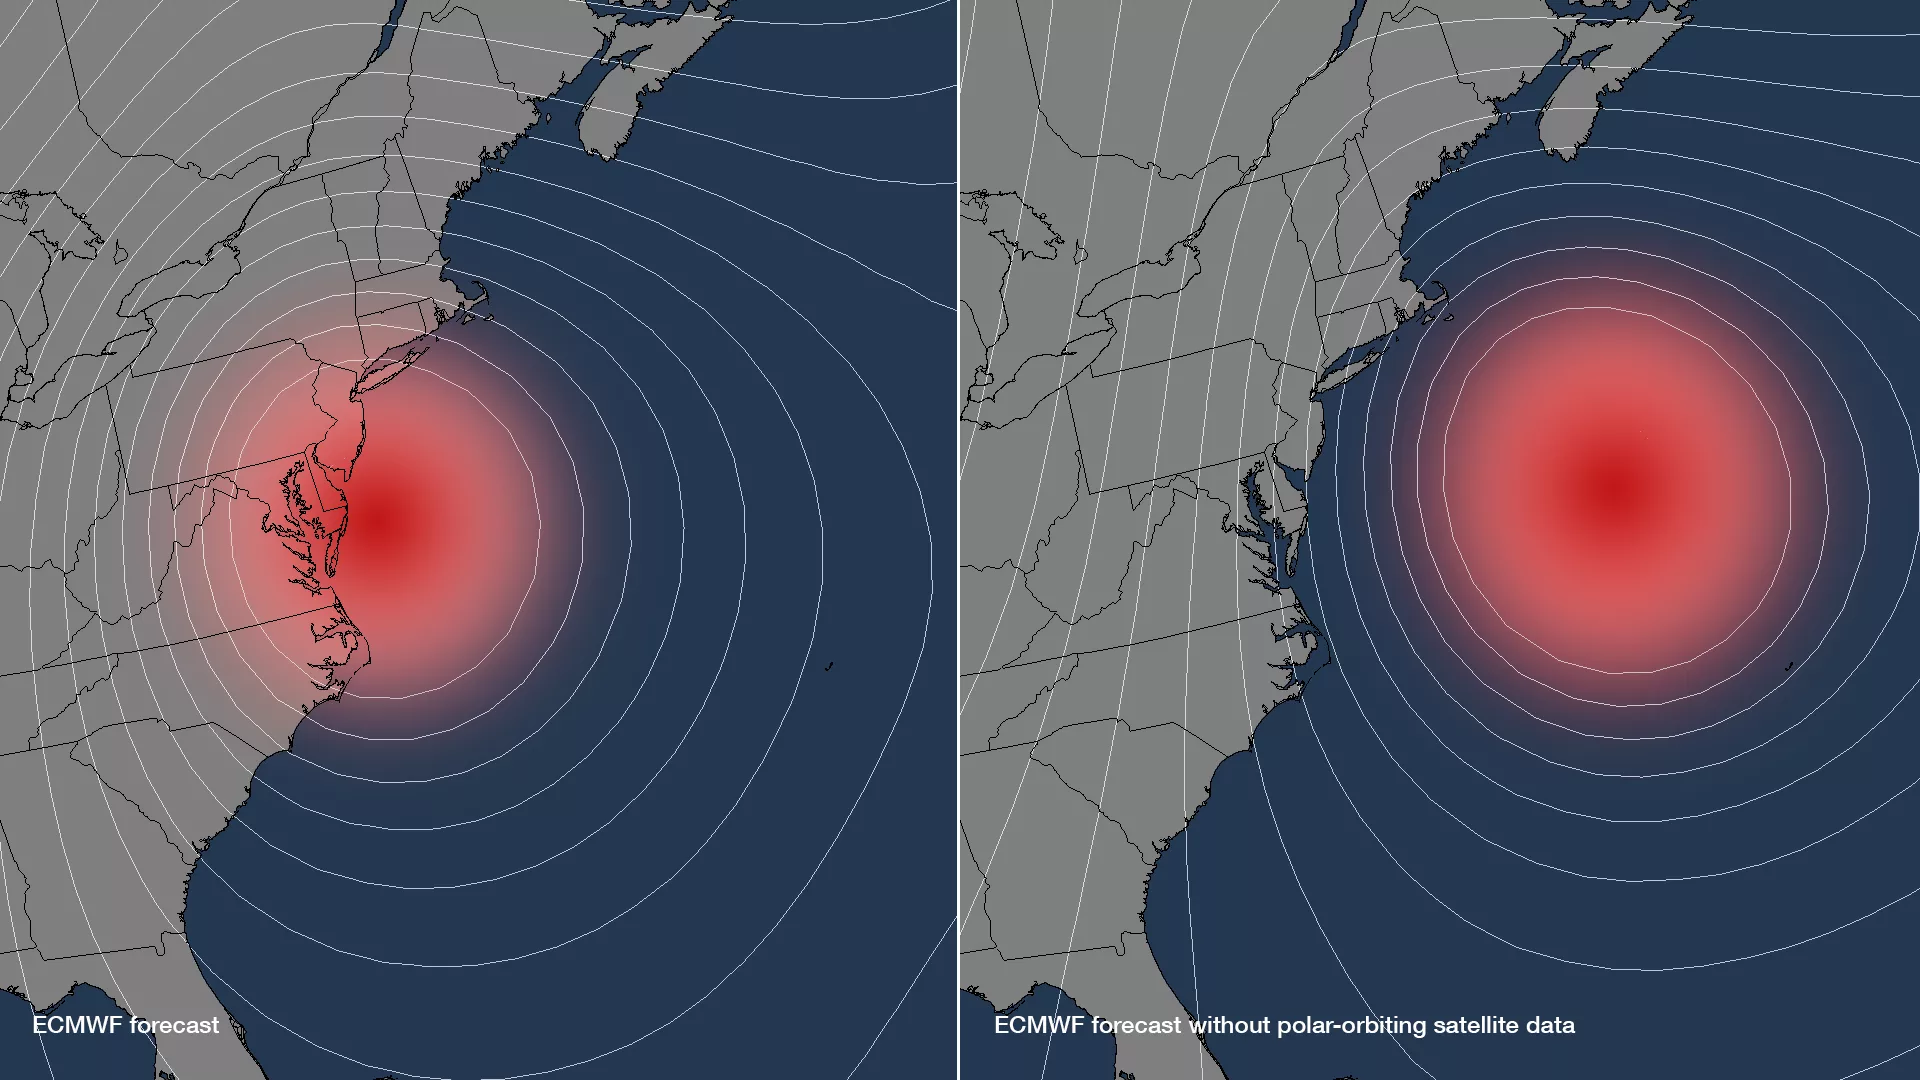 Side-by-side view of forecasts for Hurricane Sandy--one being the forecast with polar-orbiting satellite data, and the second being the forecast without it. The forecast with polar data shows the storm turning inland.